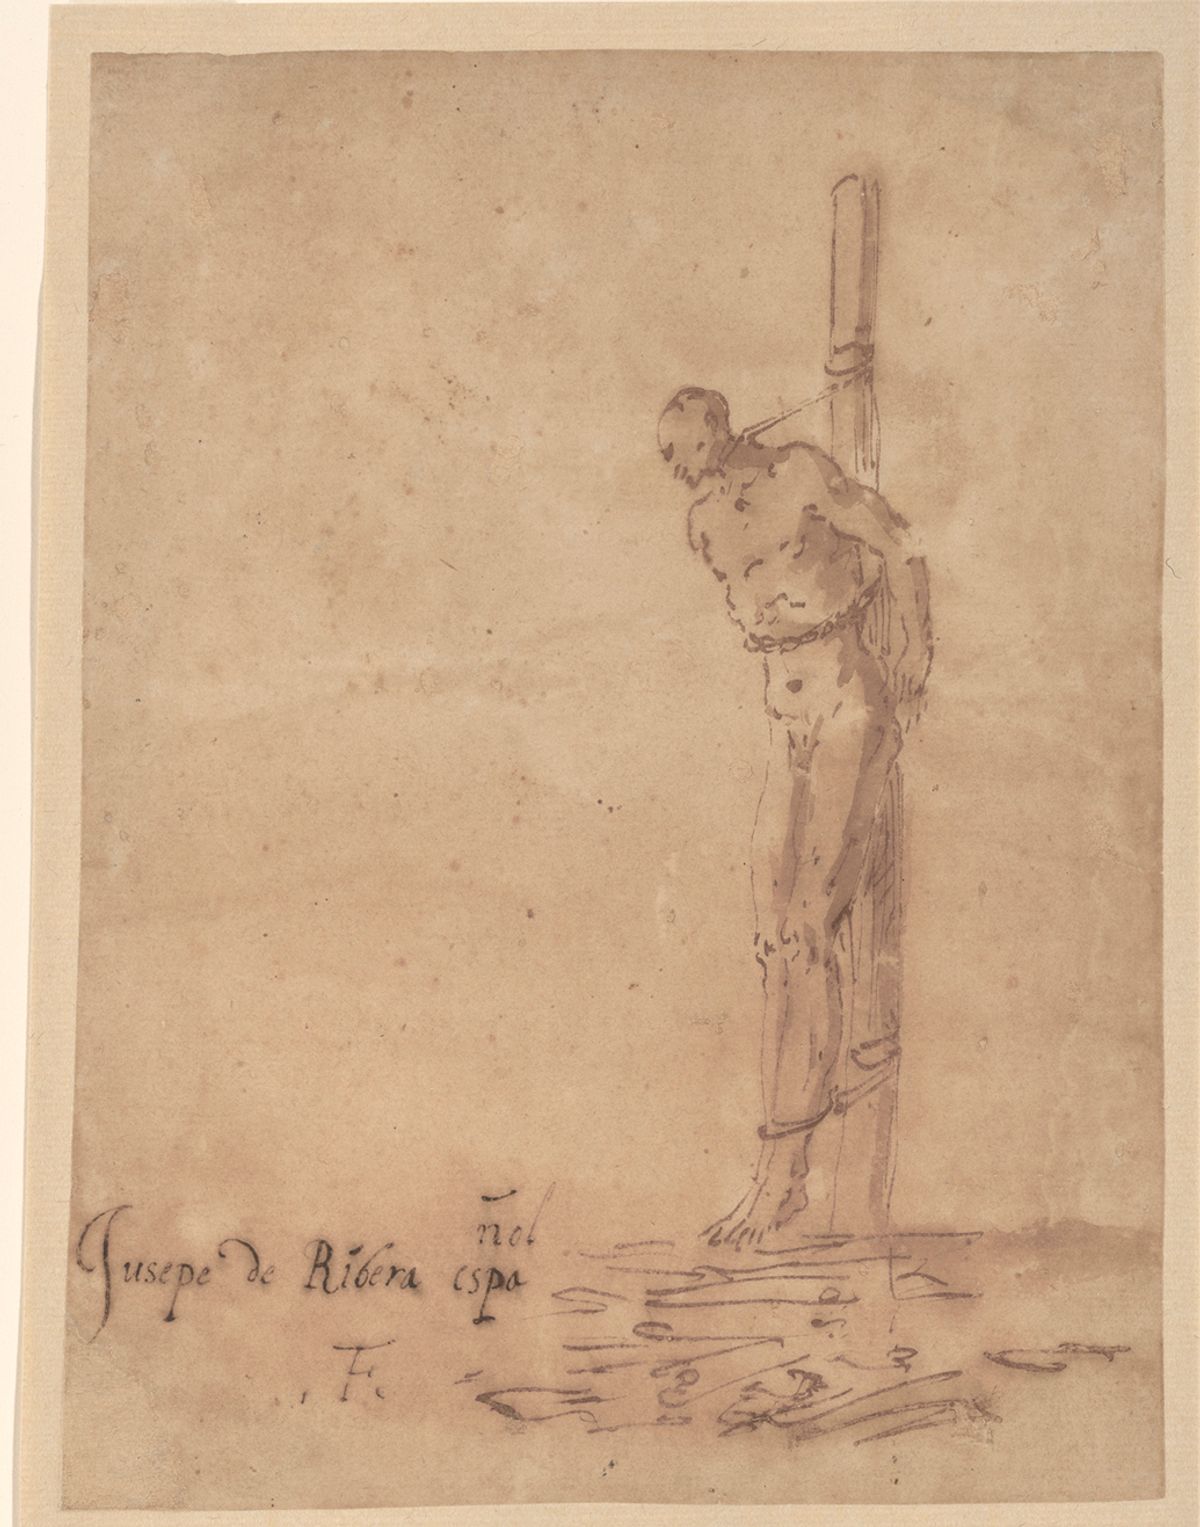 Man Bound to a Stake, around 1645 Courtesy of the Fine Arts Museums of San Francisco, San Francisco Achenbach Foundation for Graphic Arts